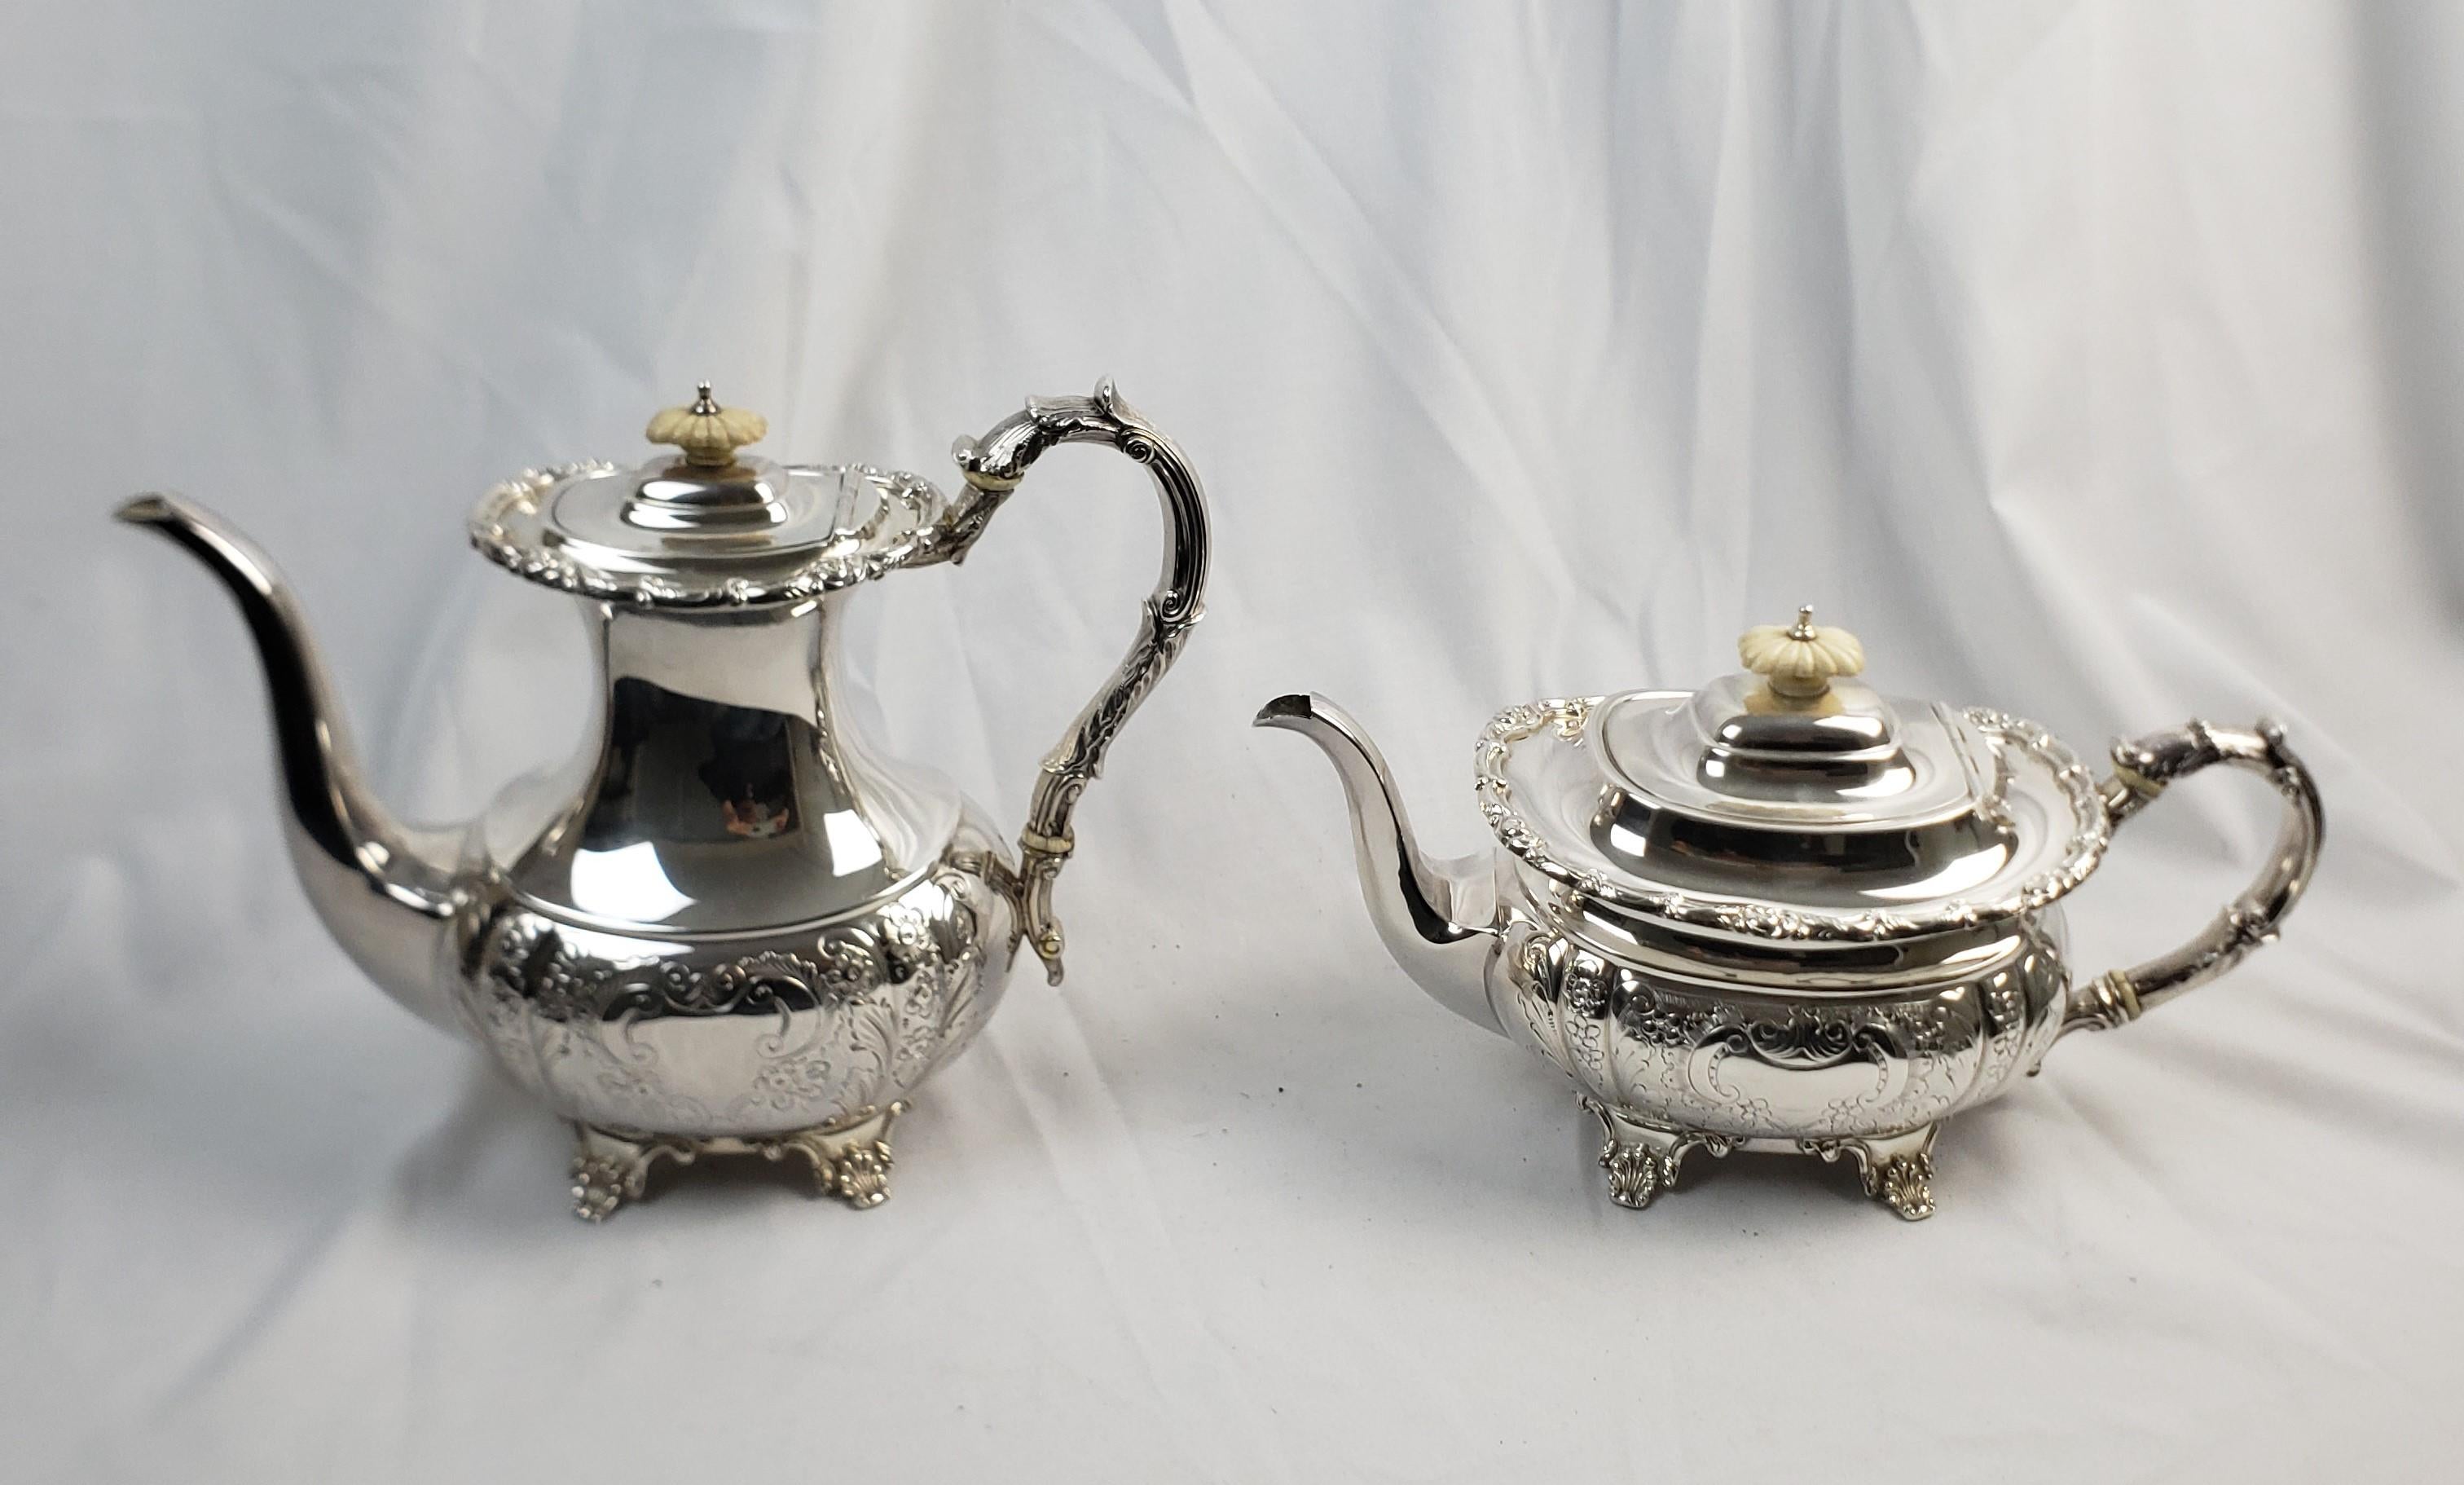 Antique English Sterling Silver Tea Set on Huge Silver Plated Serving Tray In Good Condition For Sale In Hamilton, Ontario